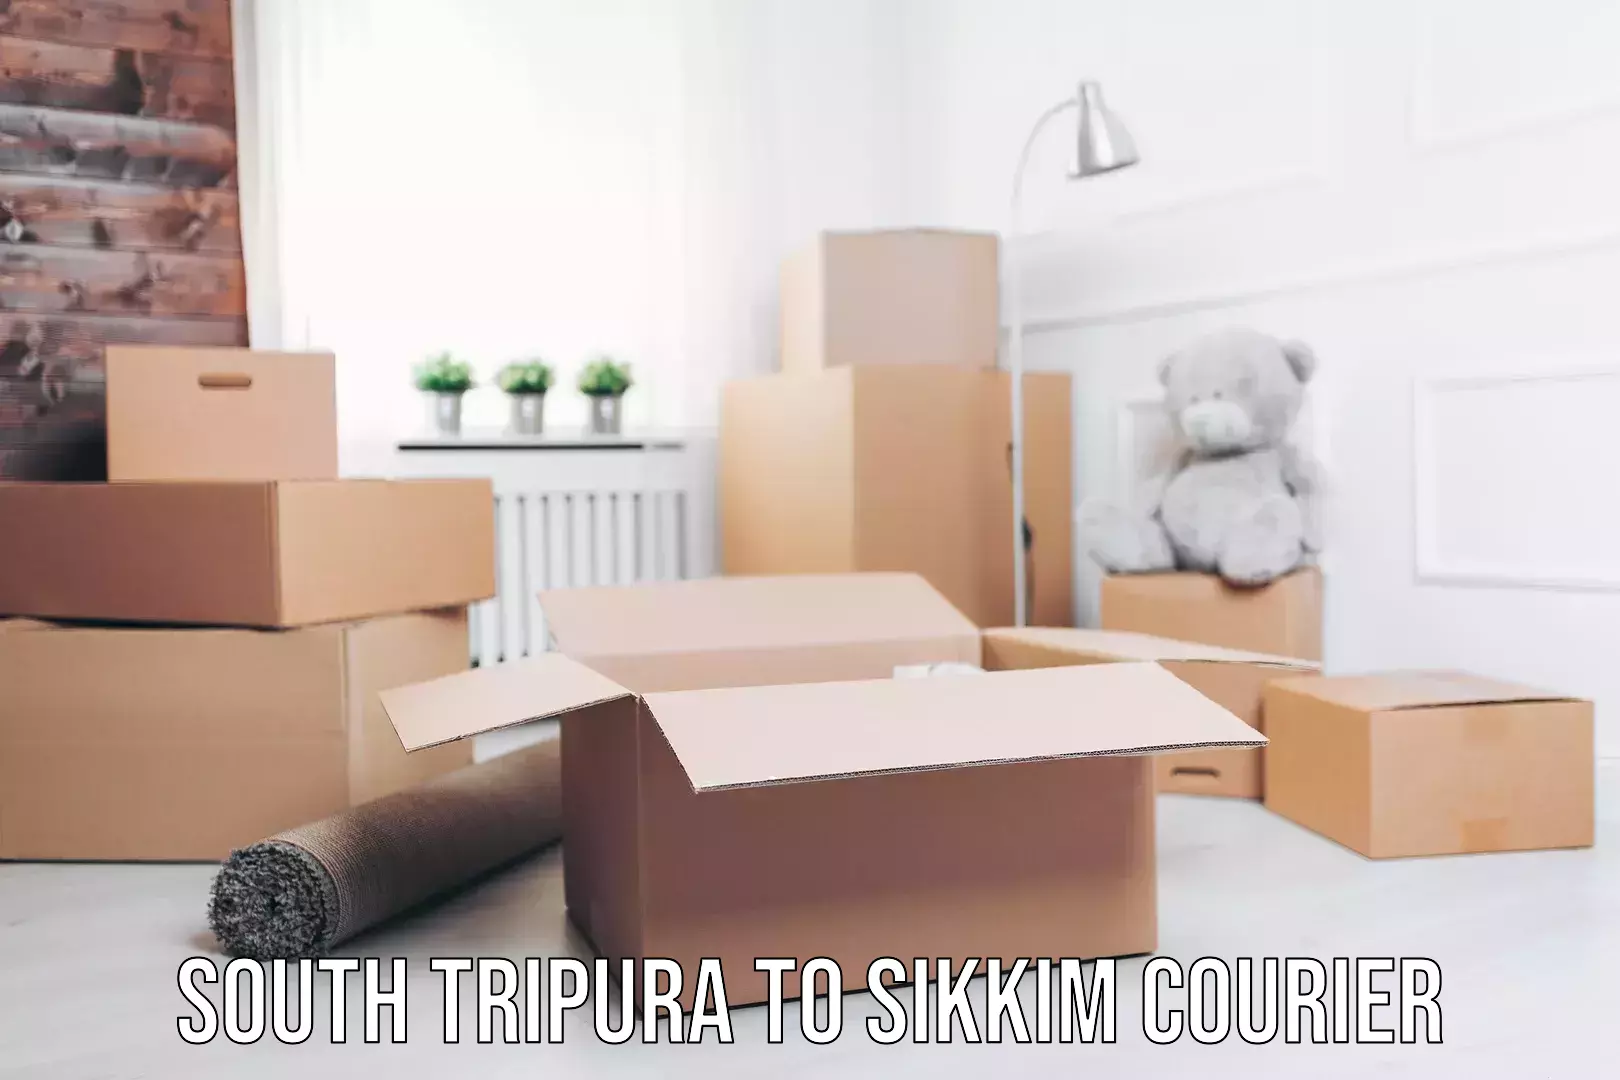 Global courier networks South Tripura to Sikkim